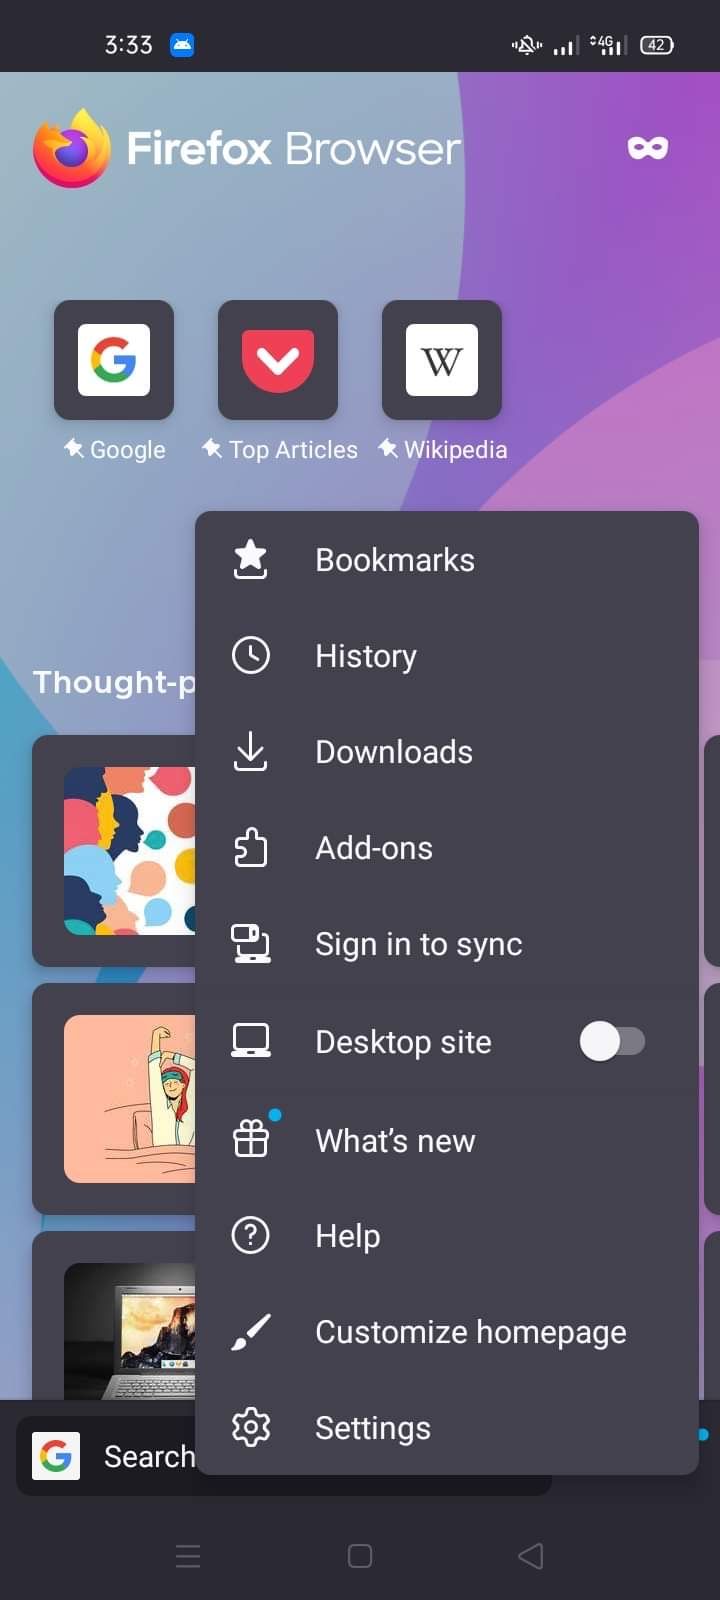 Opening Settings Option by Clicking Three Dots in the Bottom-right Corner in Firefox for Android